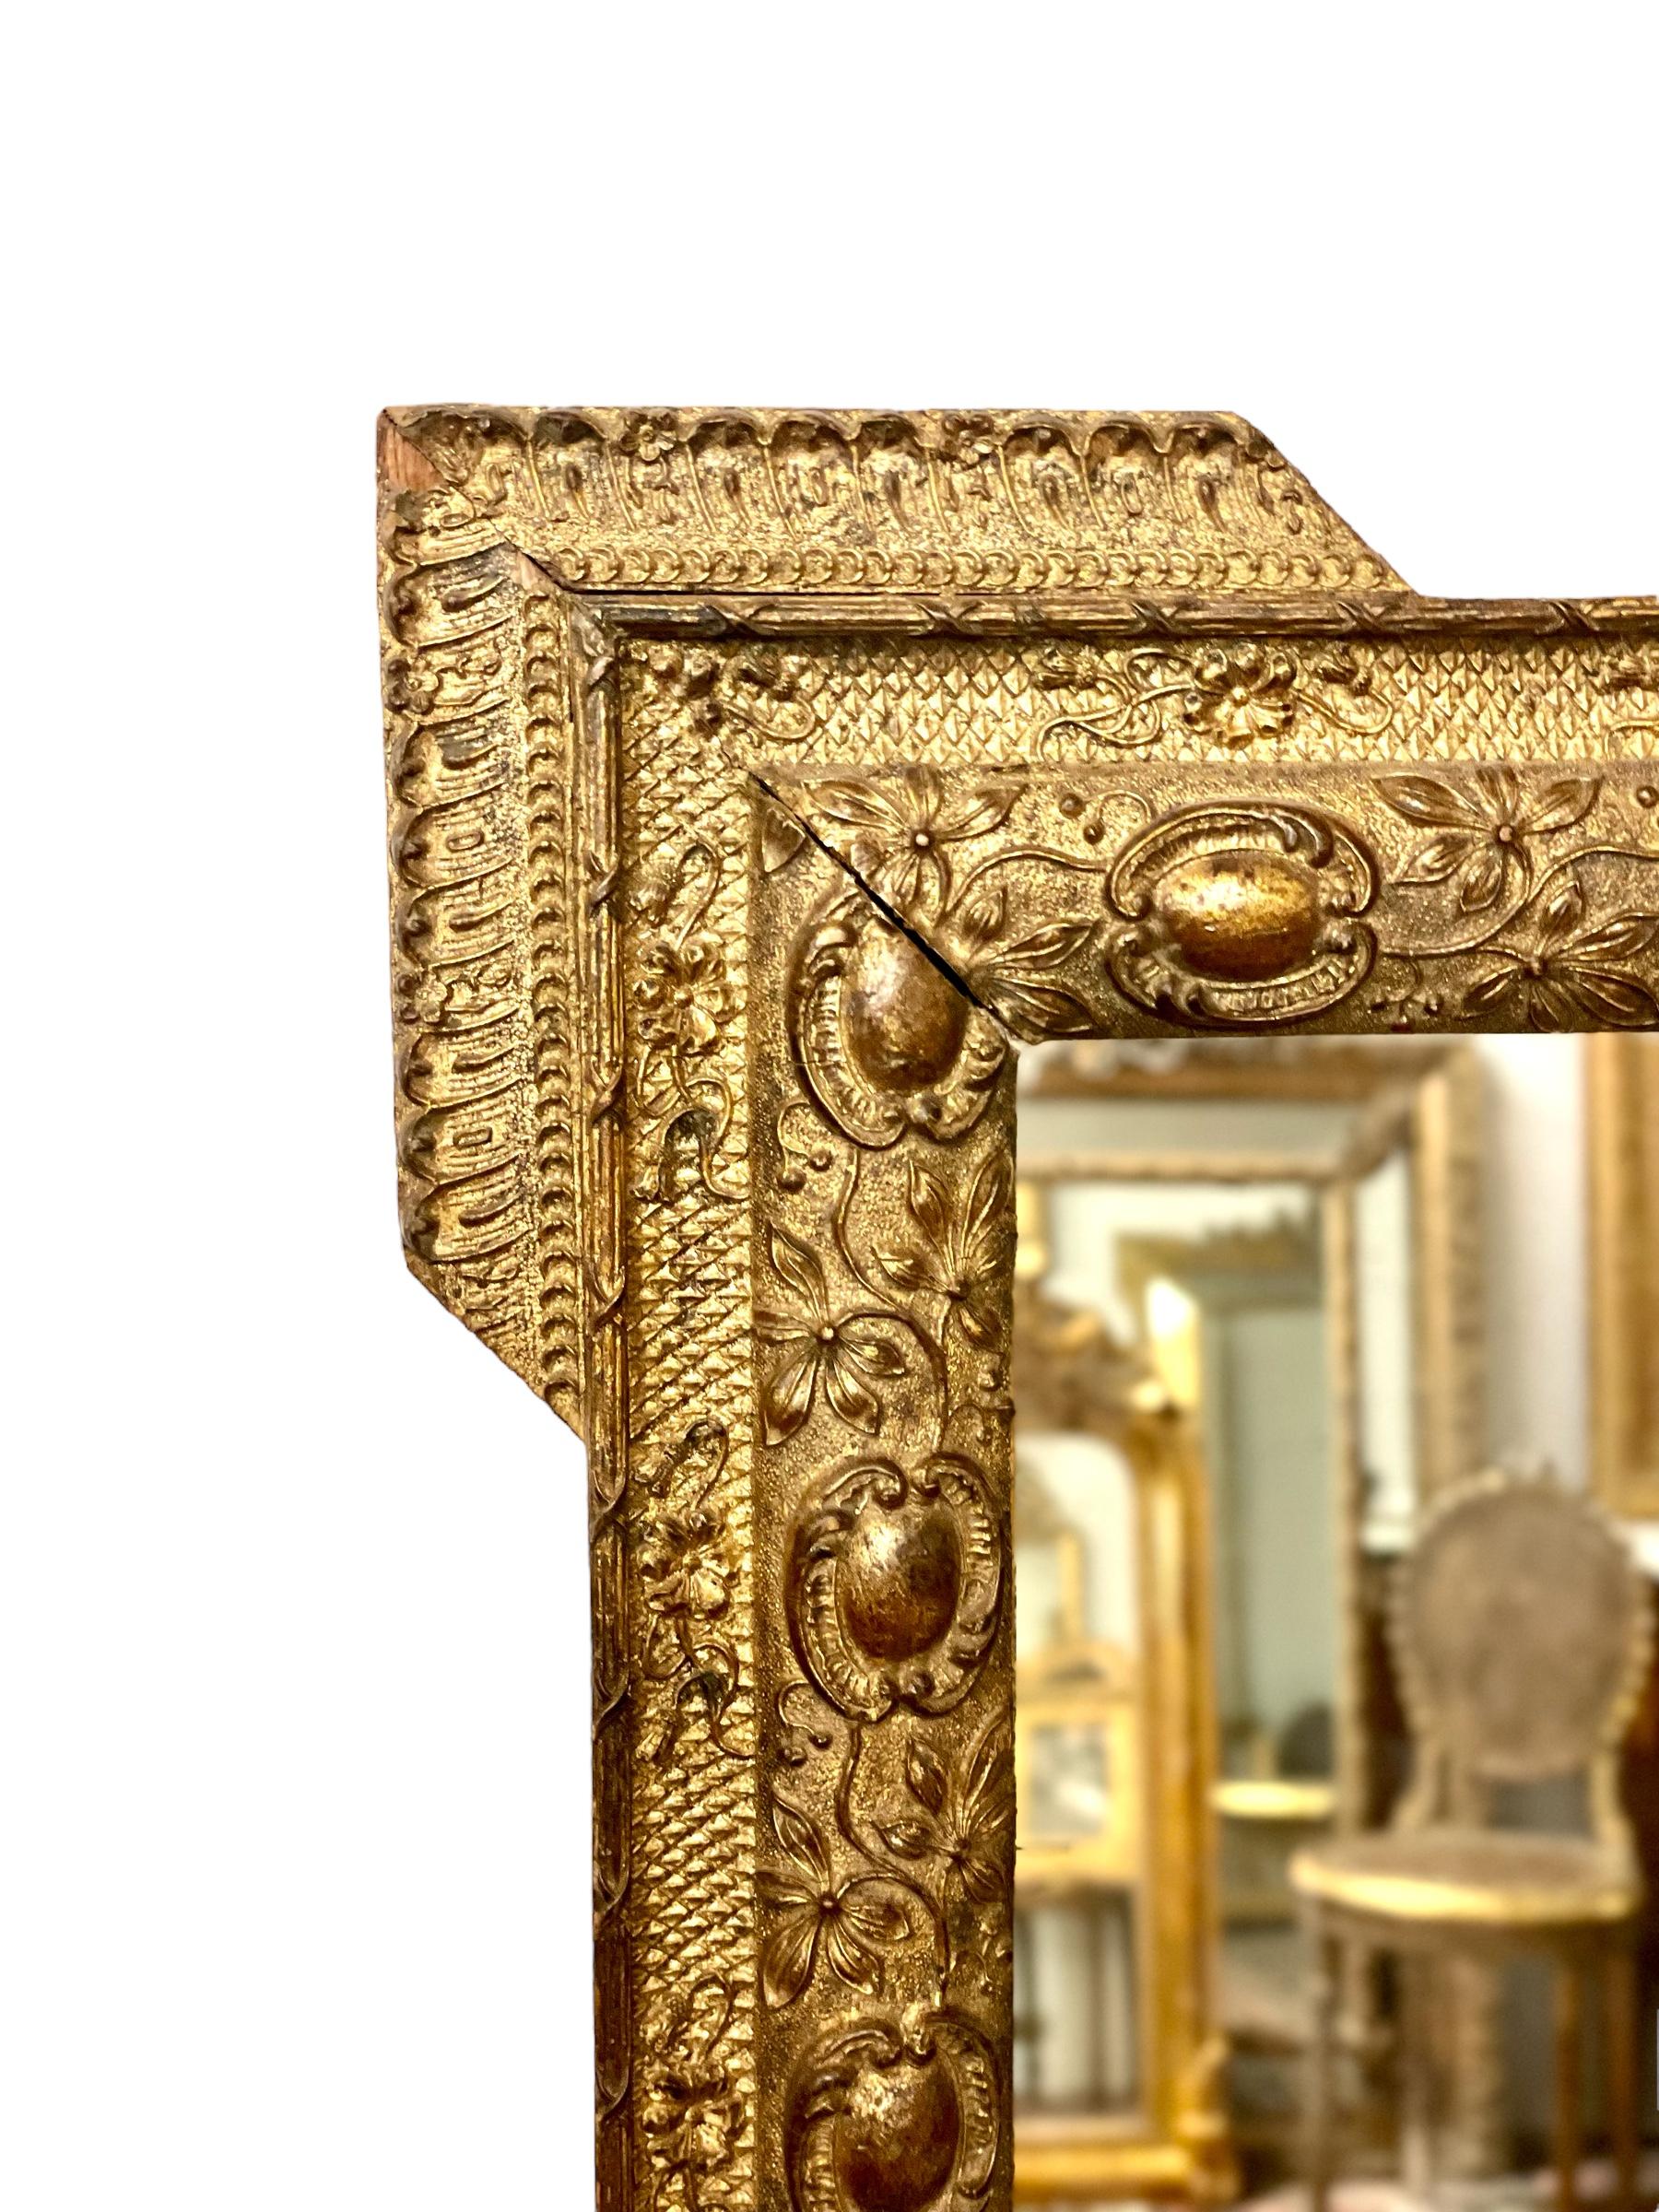 An intricately carved and very ornate wall mirror in wood and gilded stucco, decorated with oves and intertwined flowers against a background of stylised scales. Each corner features the addition of an elaborately carved 'step', which contributes